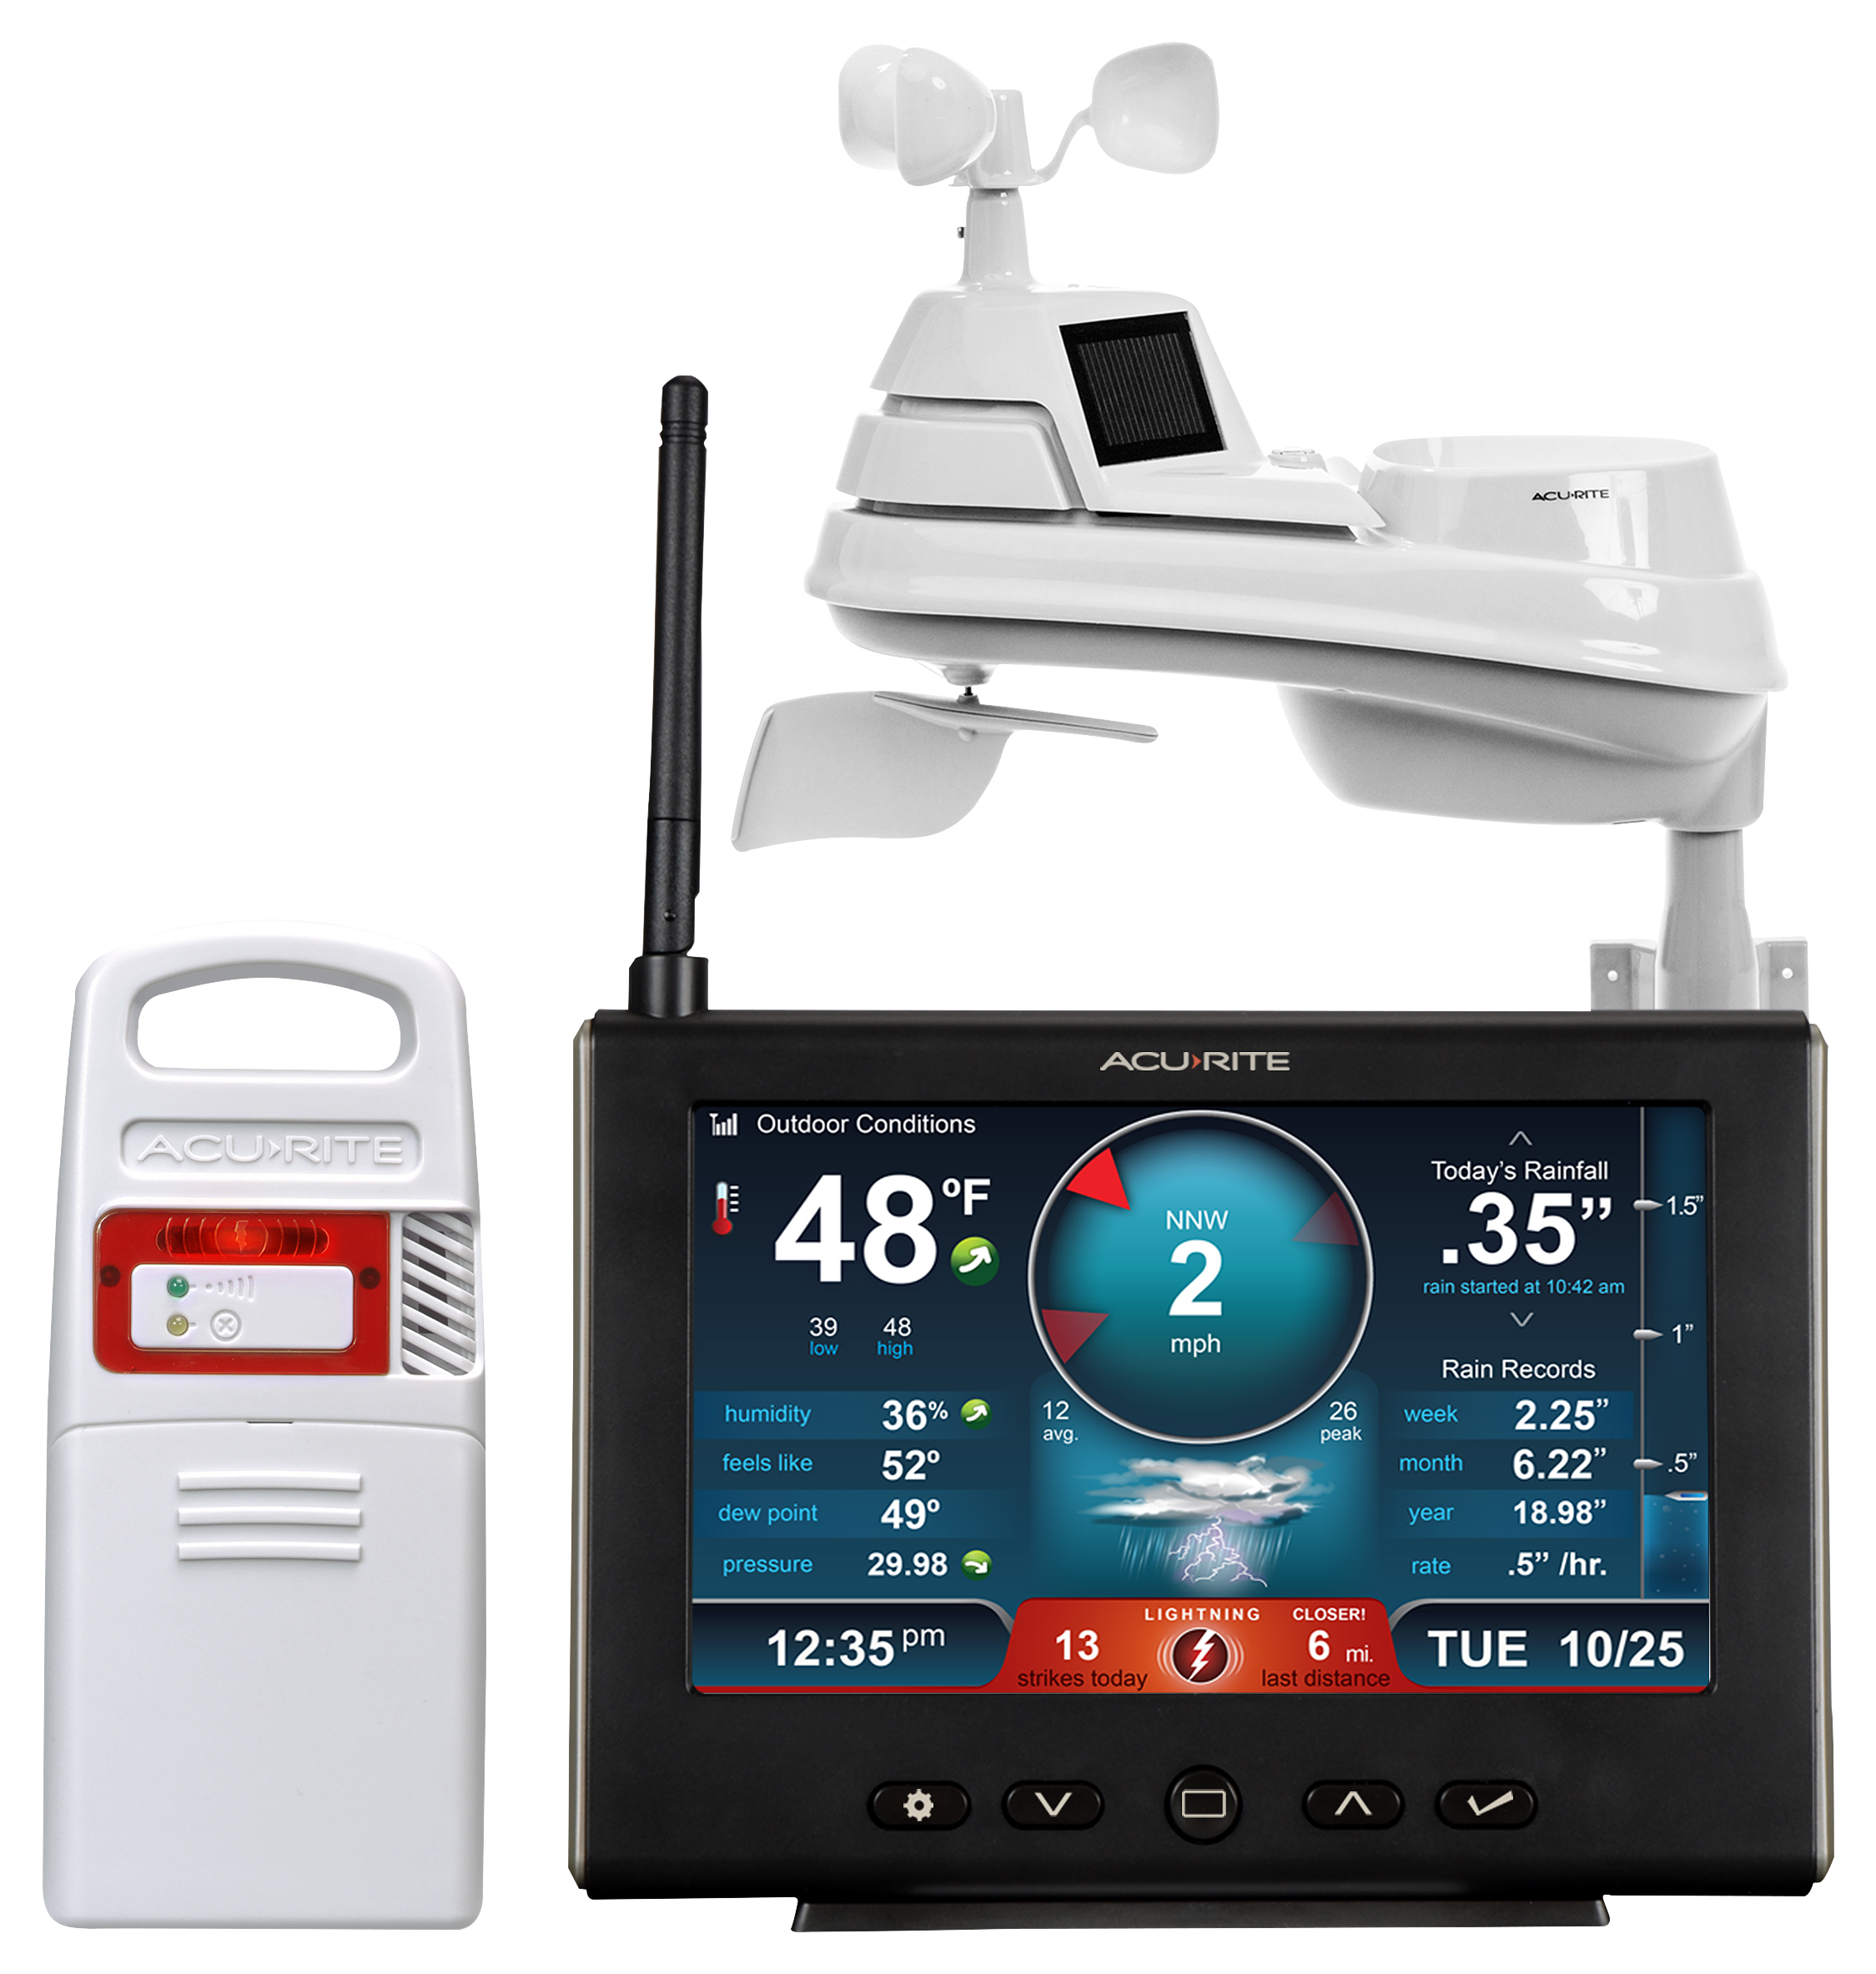 AcuRite Iris HD Weather Station with Lightning Detection